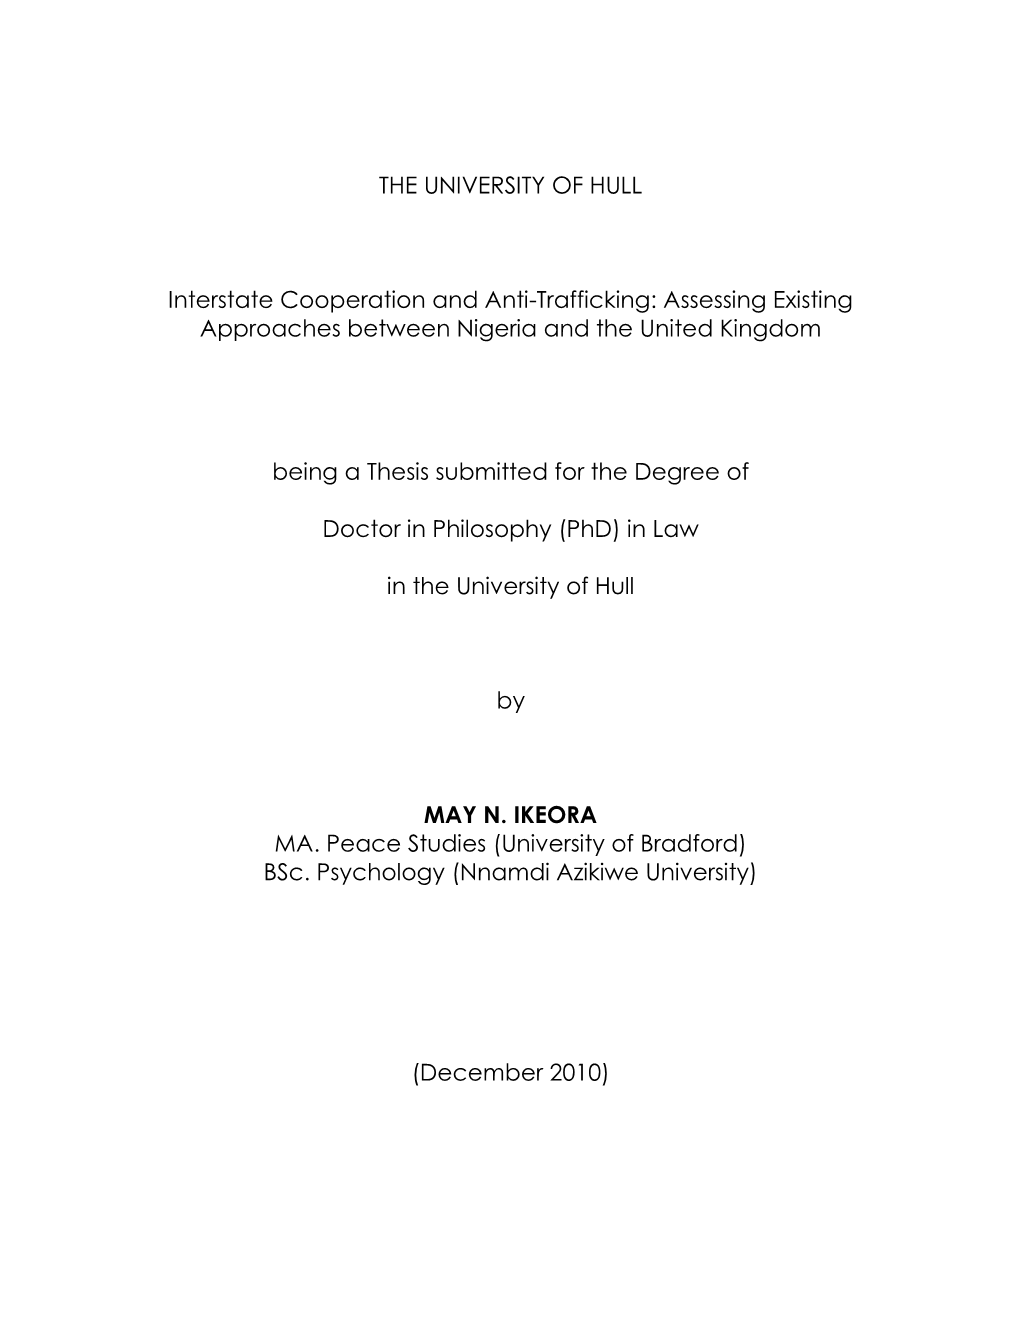 THE UNIVERSITY of HULL Interstate Cooperation and Anti-Trafficking: Assessing Existing Approaches Between Nigeria and the United